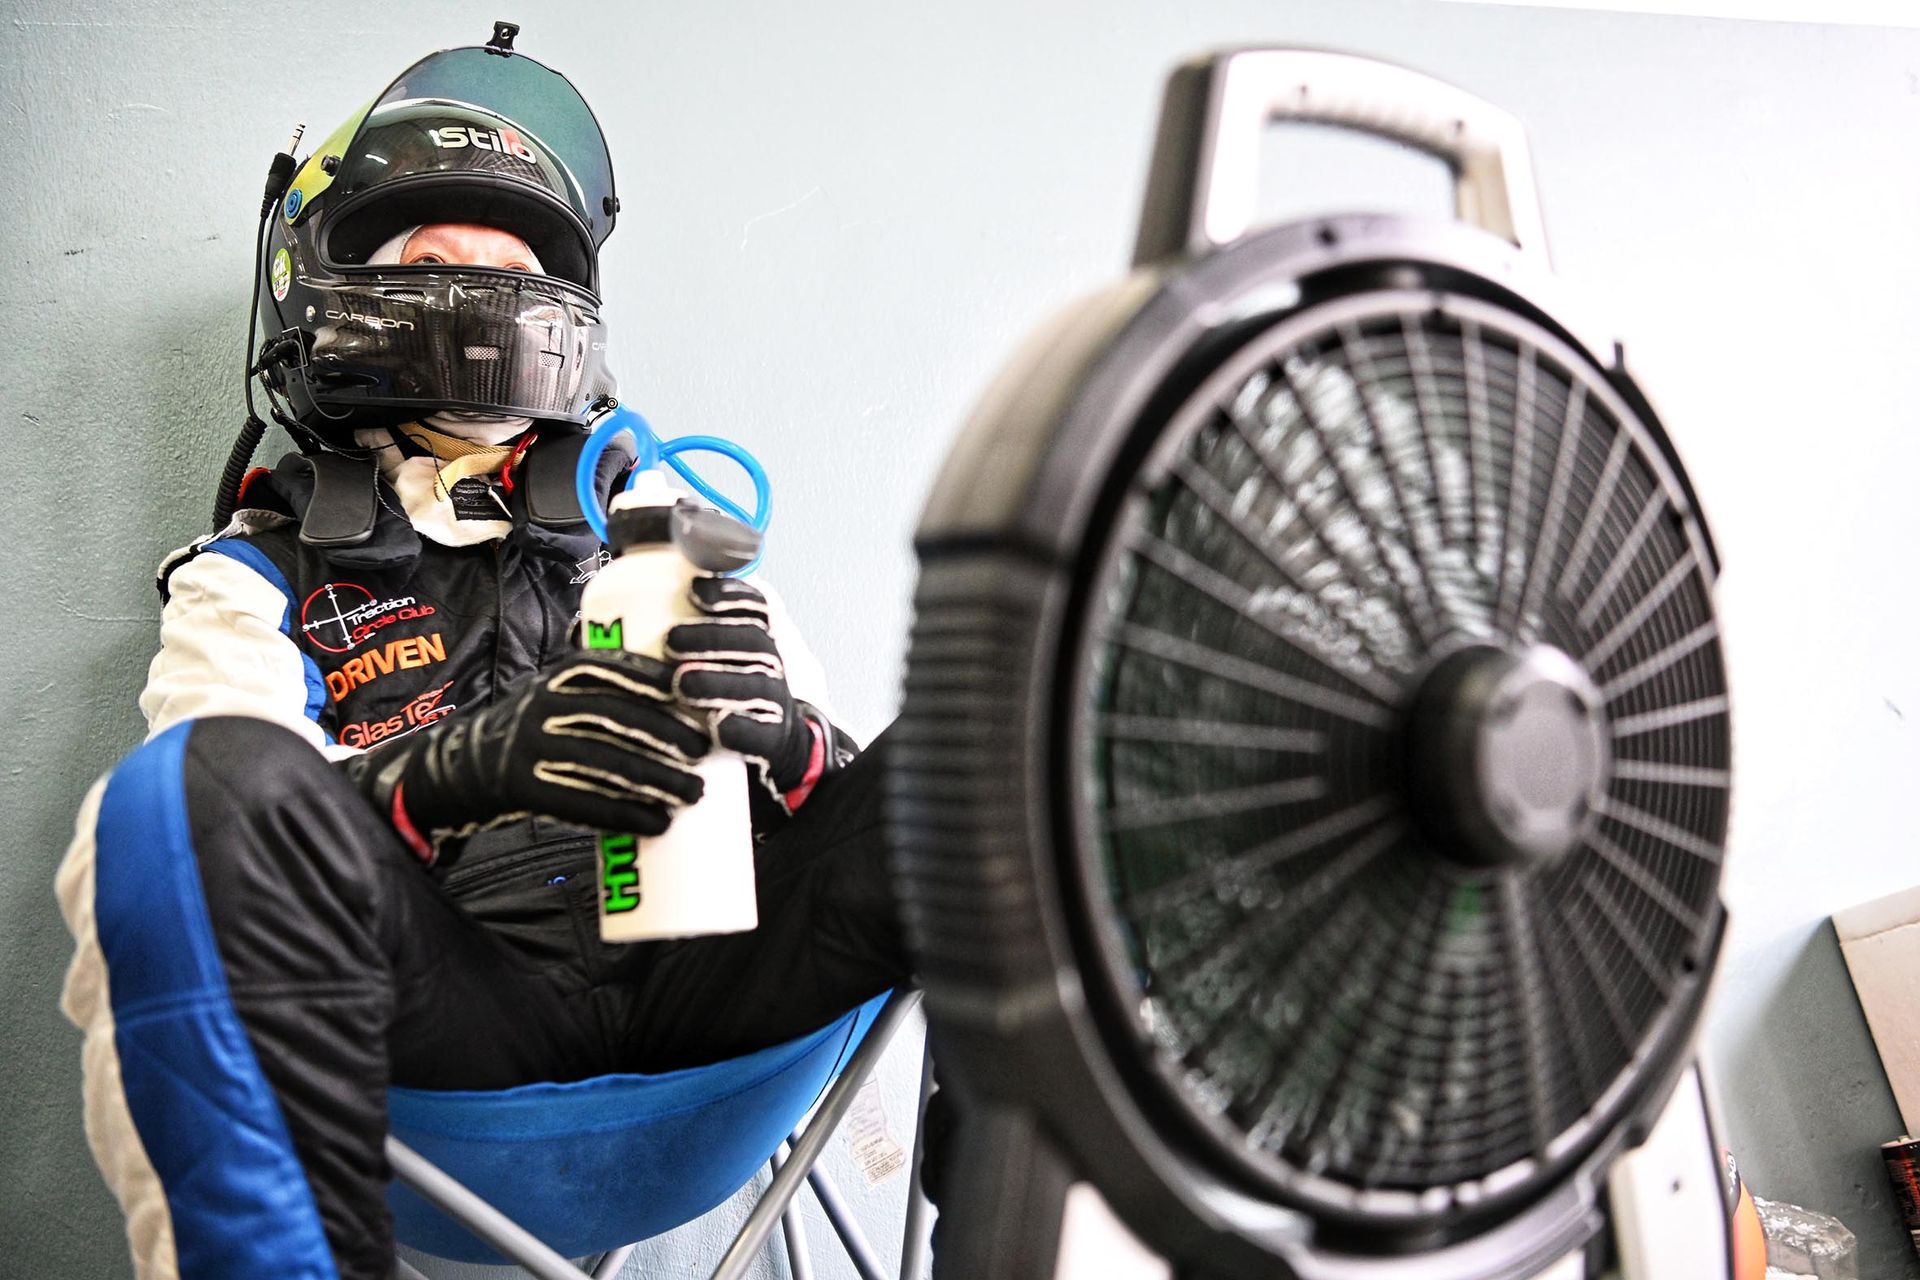 Mr Jonathan Teong, a driver from Team 667, tries to stay cool while waiting to take the wheel.